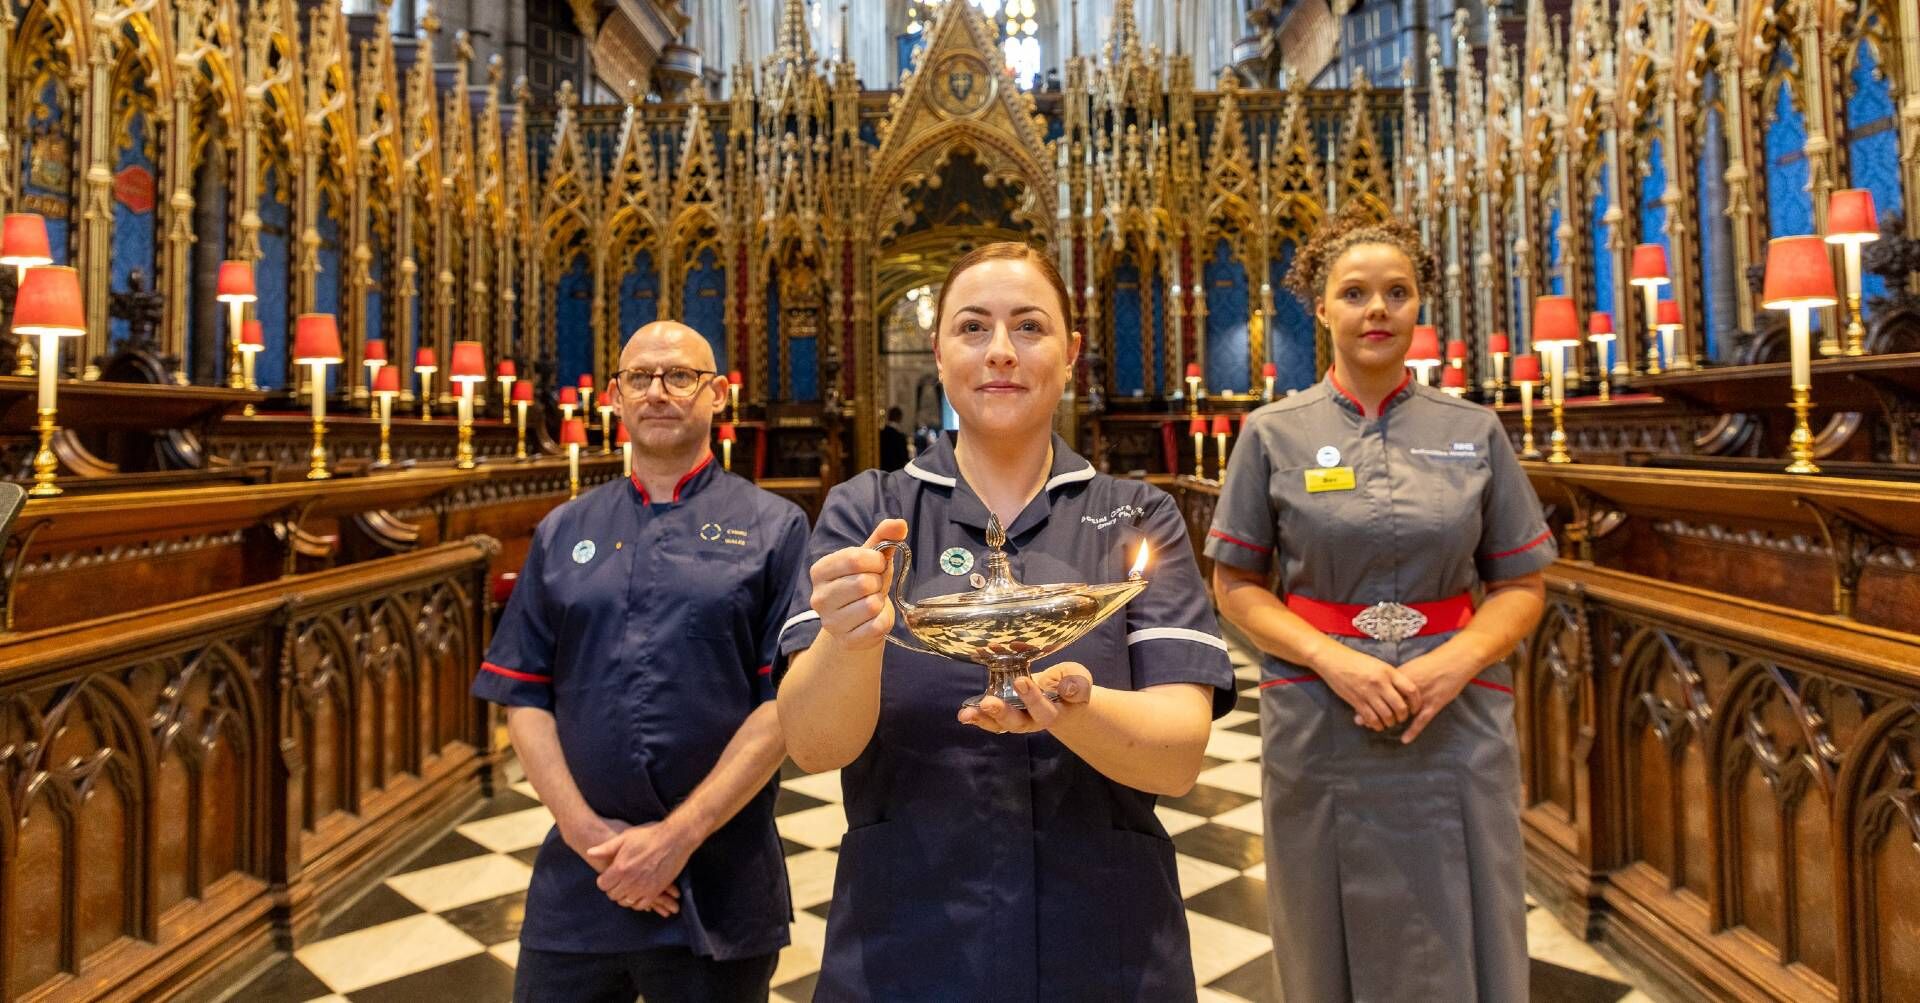 Nurses come together to ‘celebrate and reflect’ at Westminster Abbey service